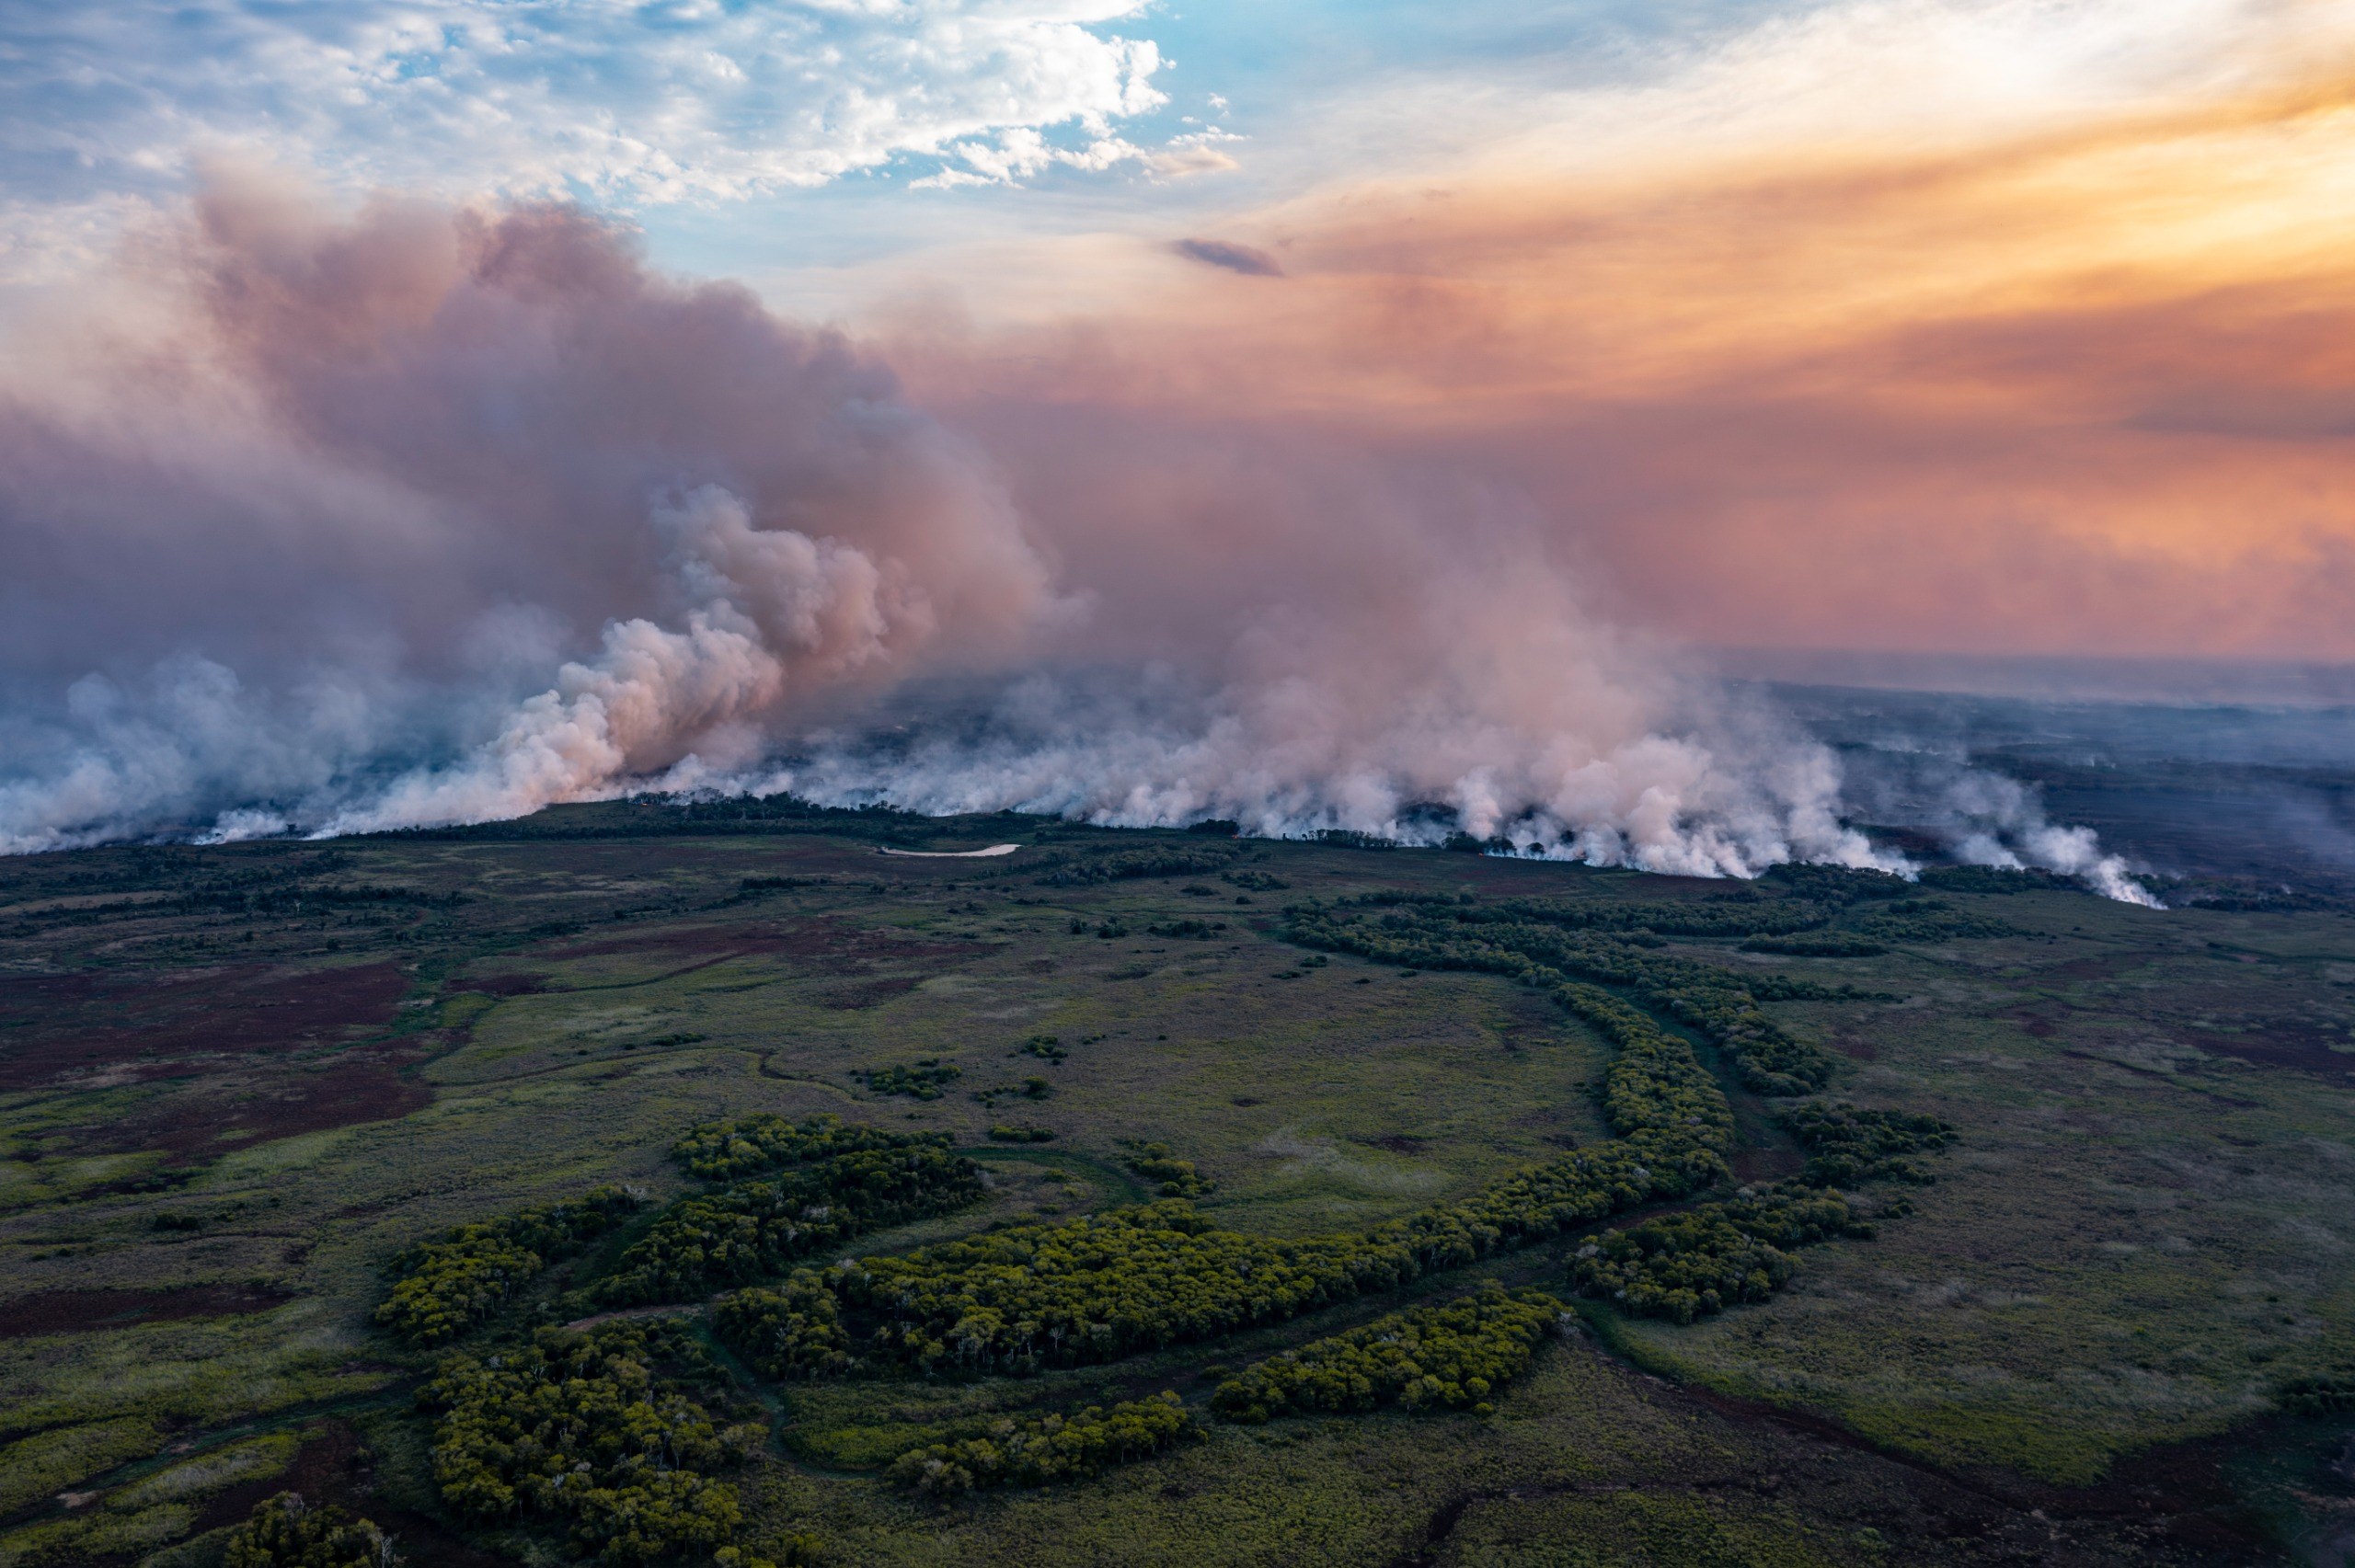 EU supply chains drive deforestation in biodiversity hotspot as major fires spread: EJF report